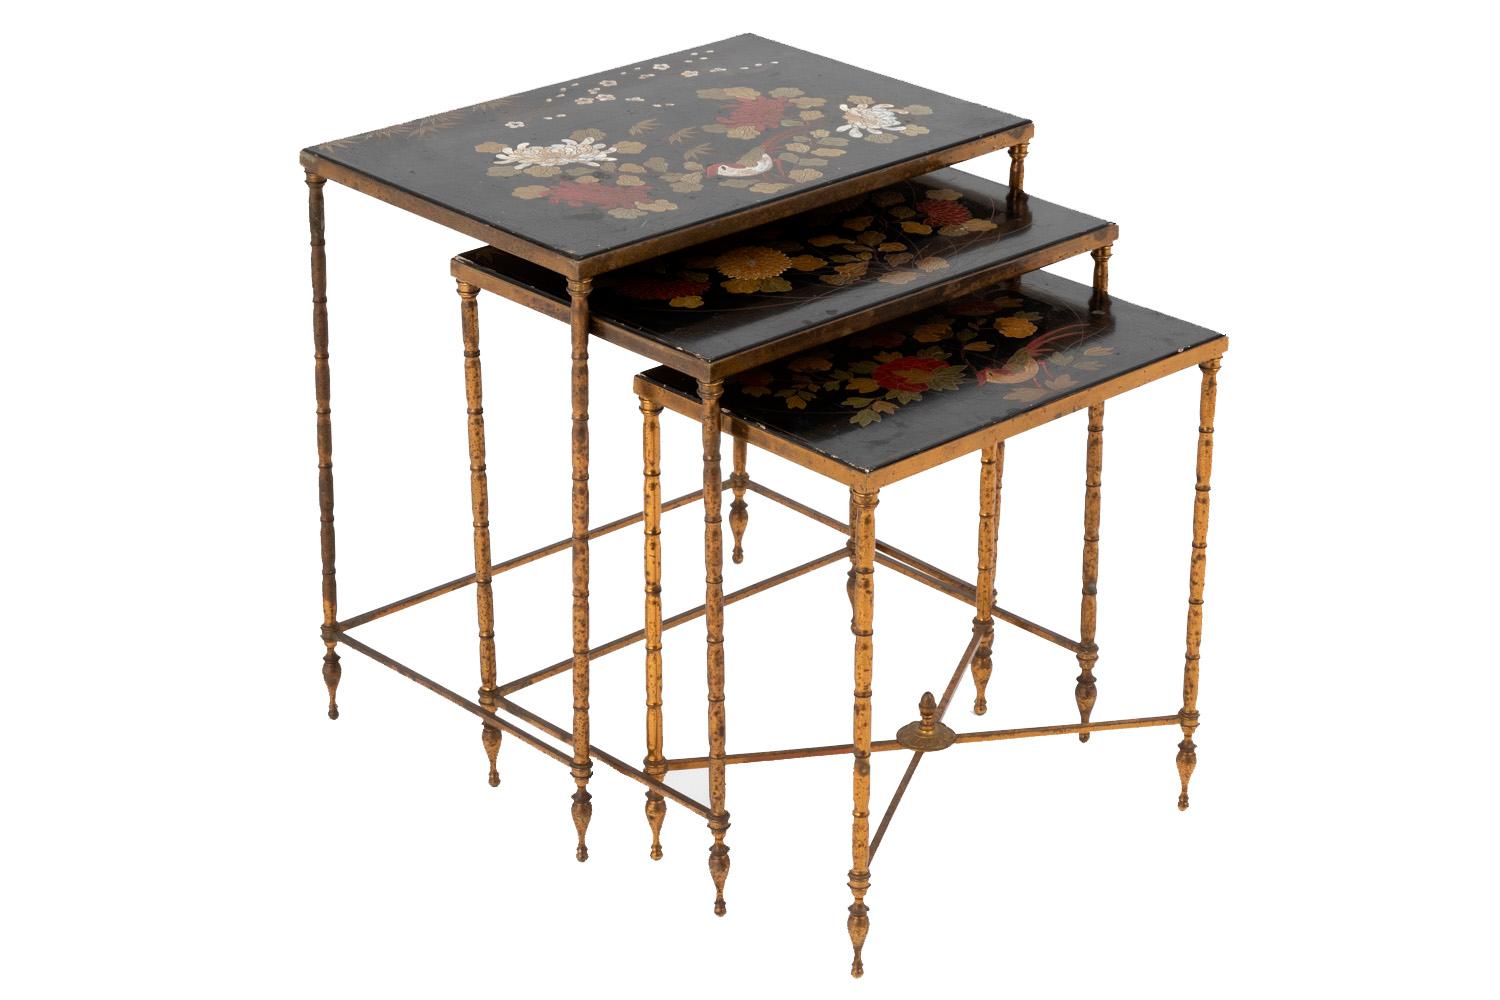 Maison Baguès, Nested Tables in Flowered Black Lacquer, 1950s (Chinoiserie)